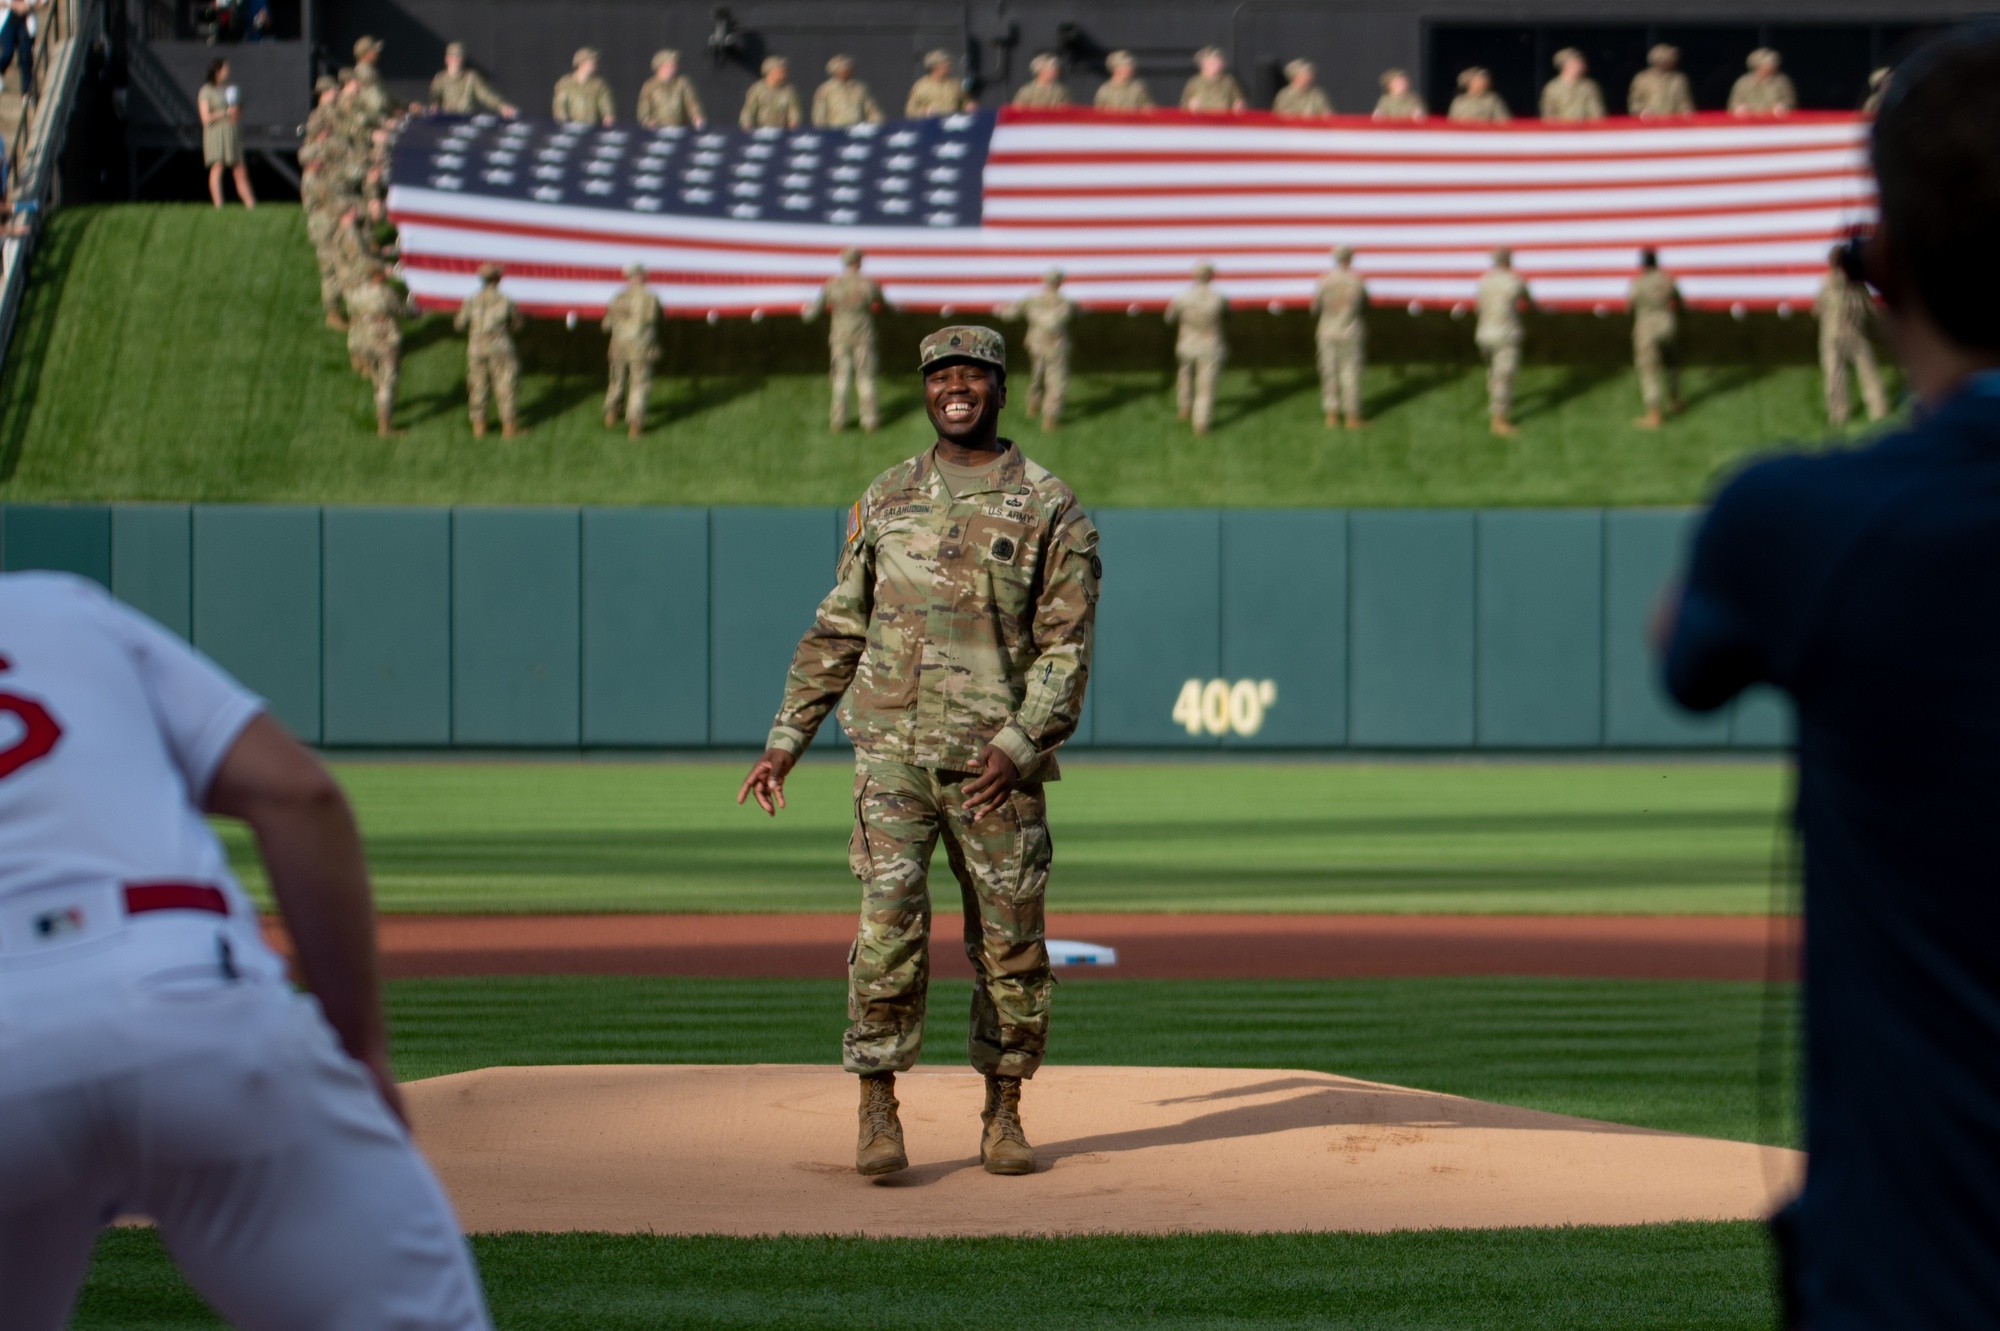 DVIDS - Images - Military Appreciation at St. Louis Cardinals baseball game  [Image 4 of 4]